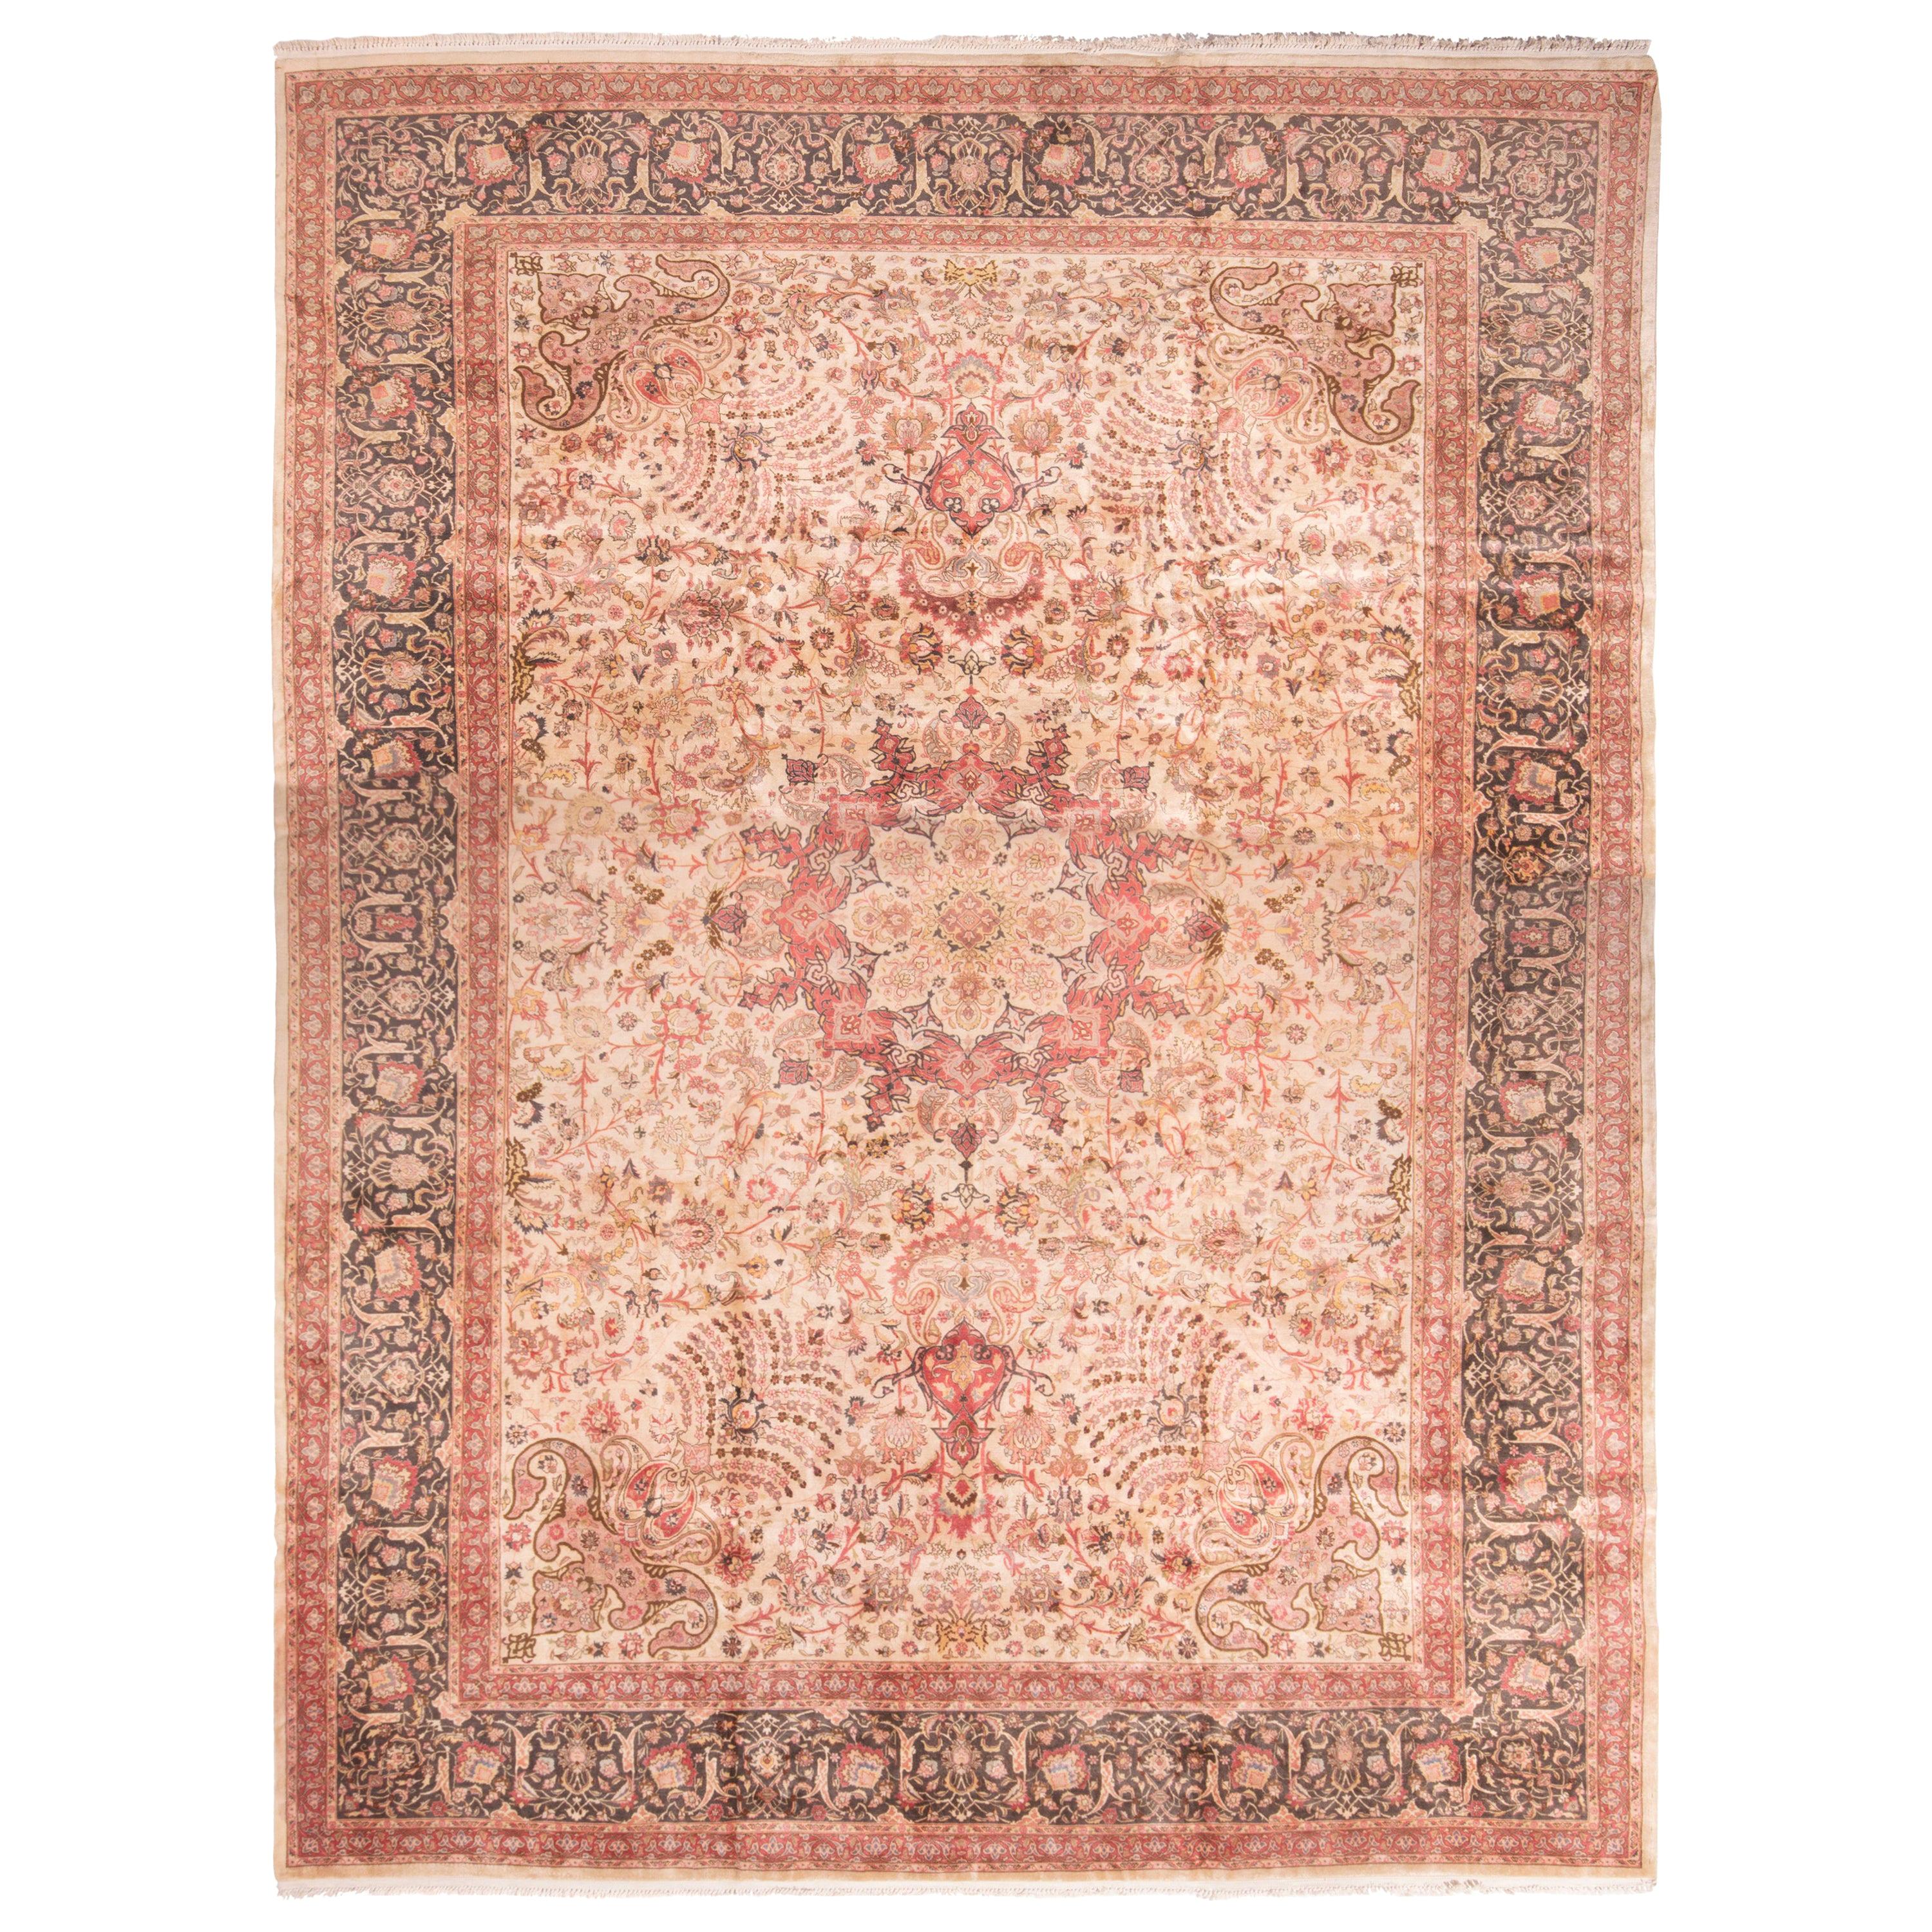 Antique Tabriz Medallion-Style Pink Wool Rug with Floral Patterns For Sale